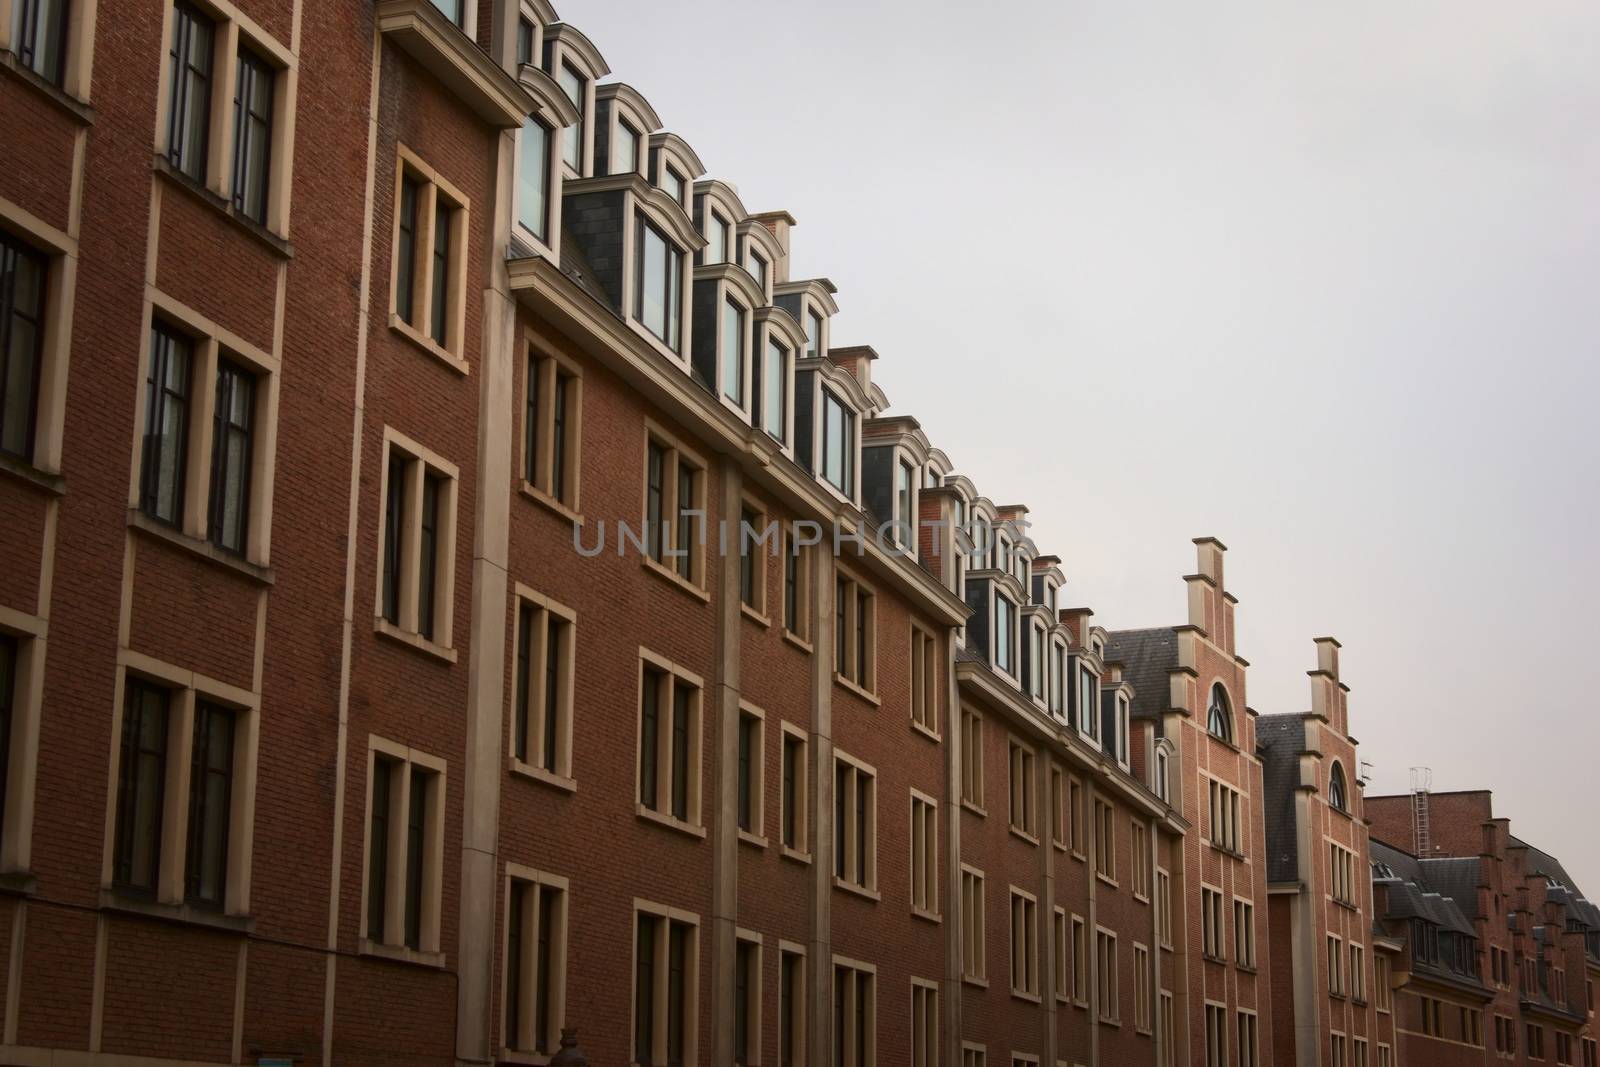 Typical flemish architecture on residential buildings in Brussels, Belgium.